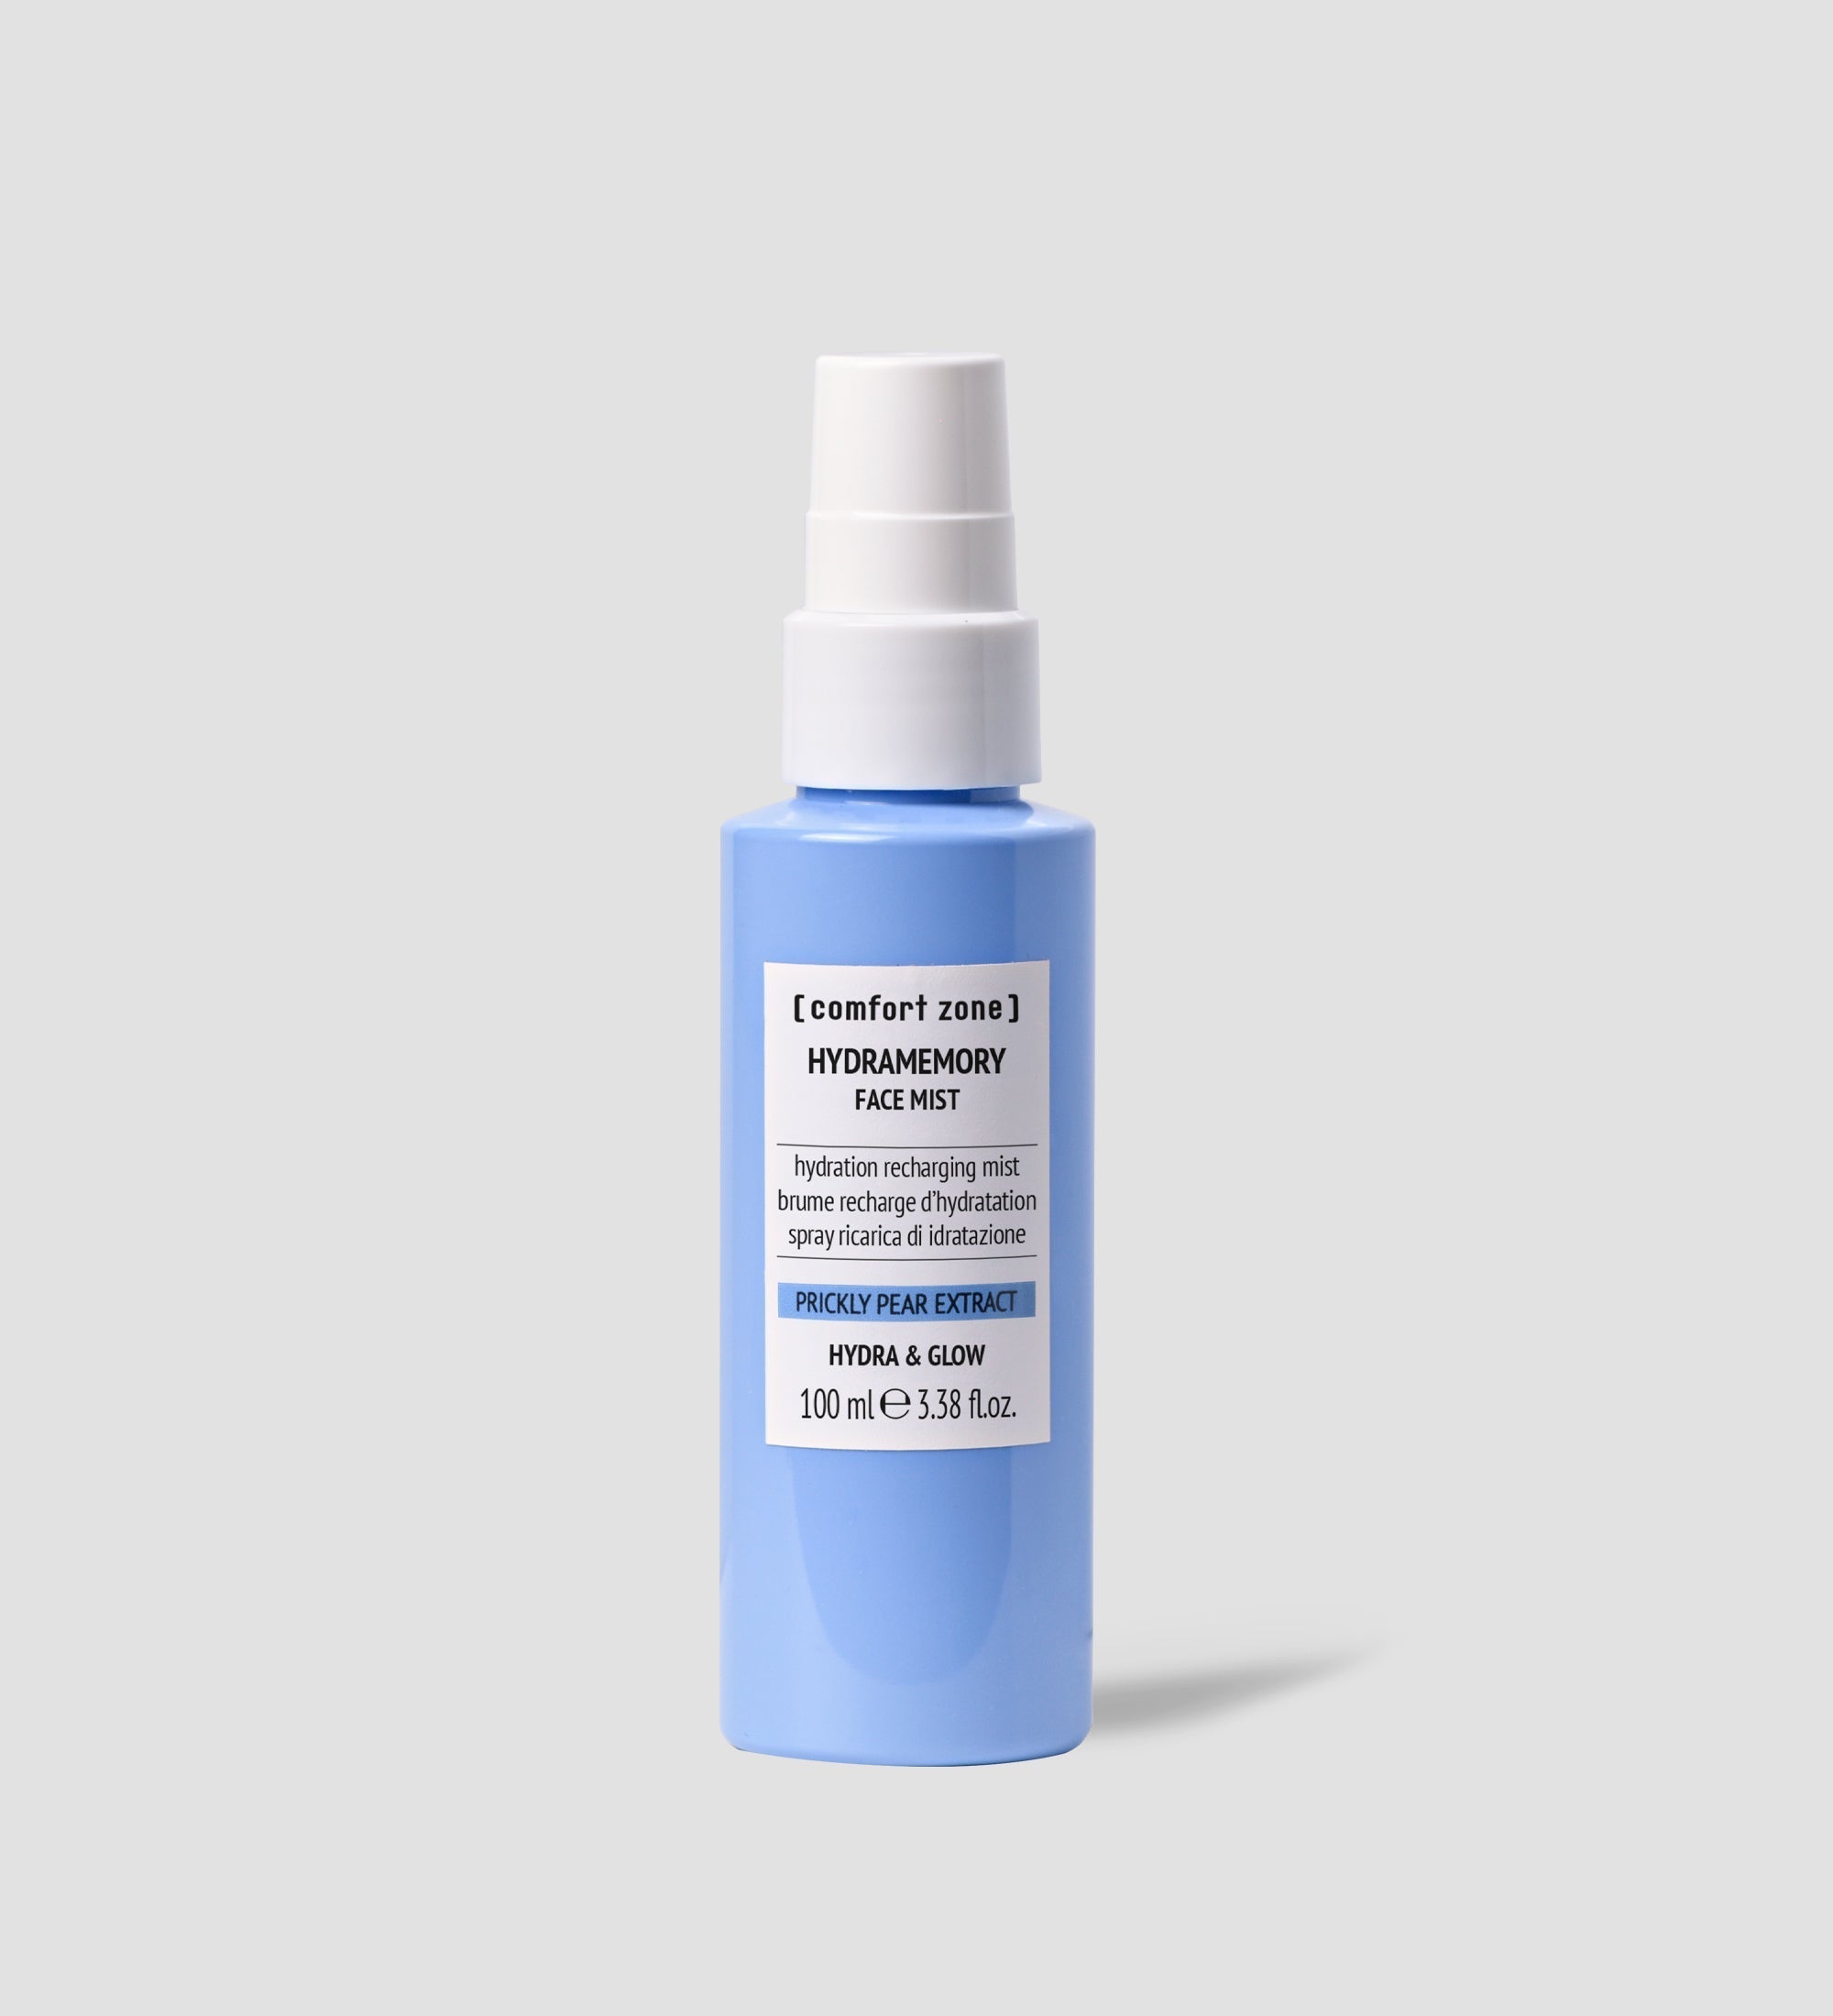 Hydramemory Face Mist (Retail)